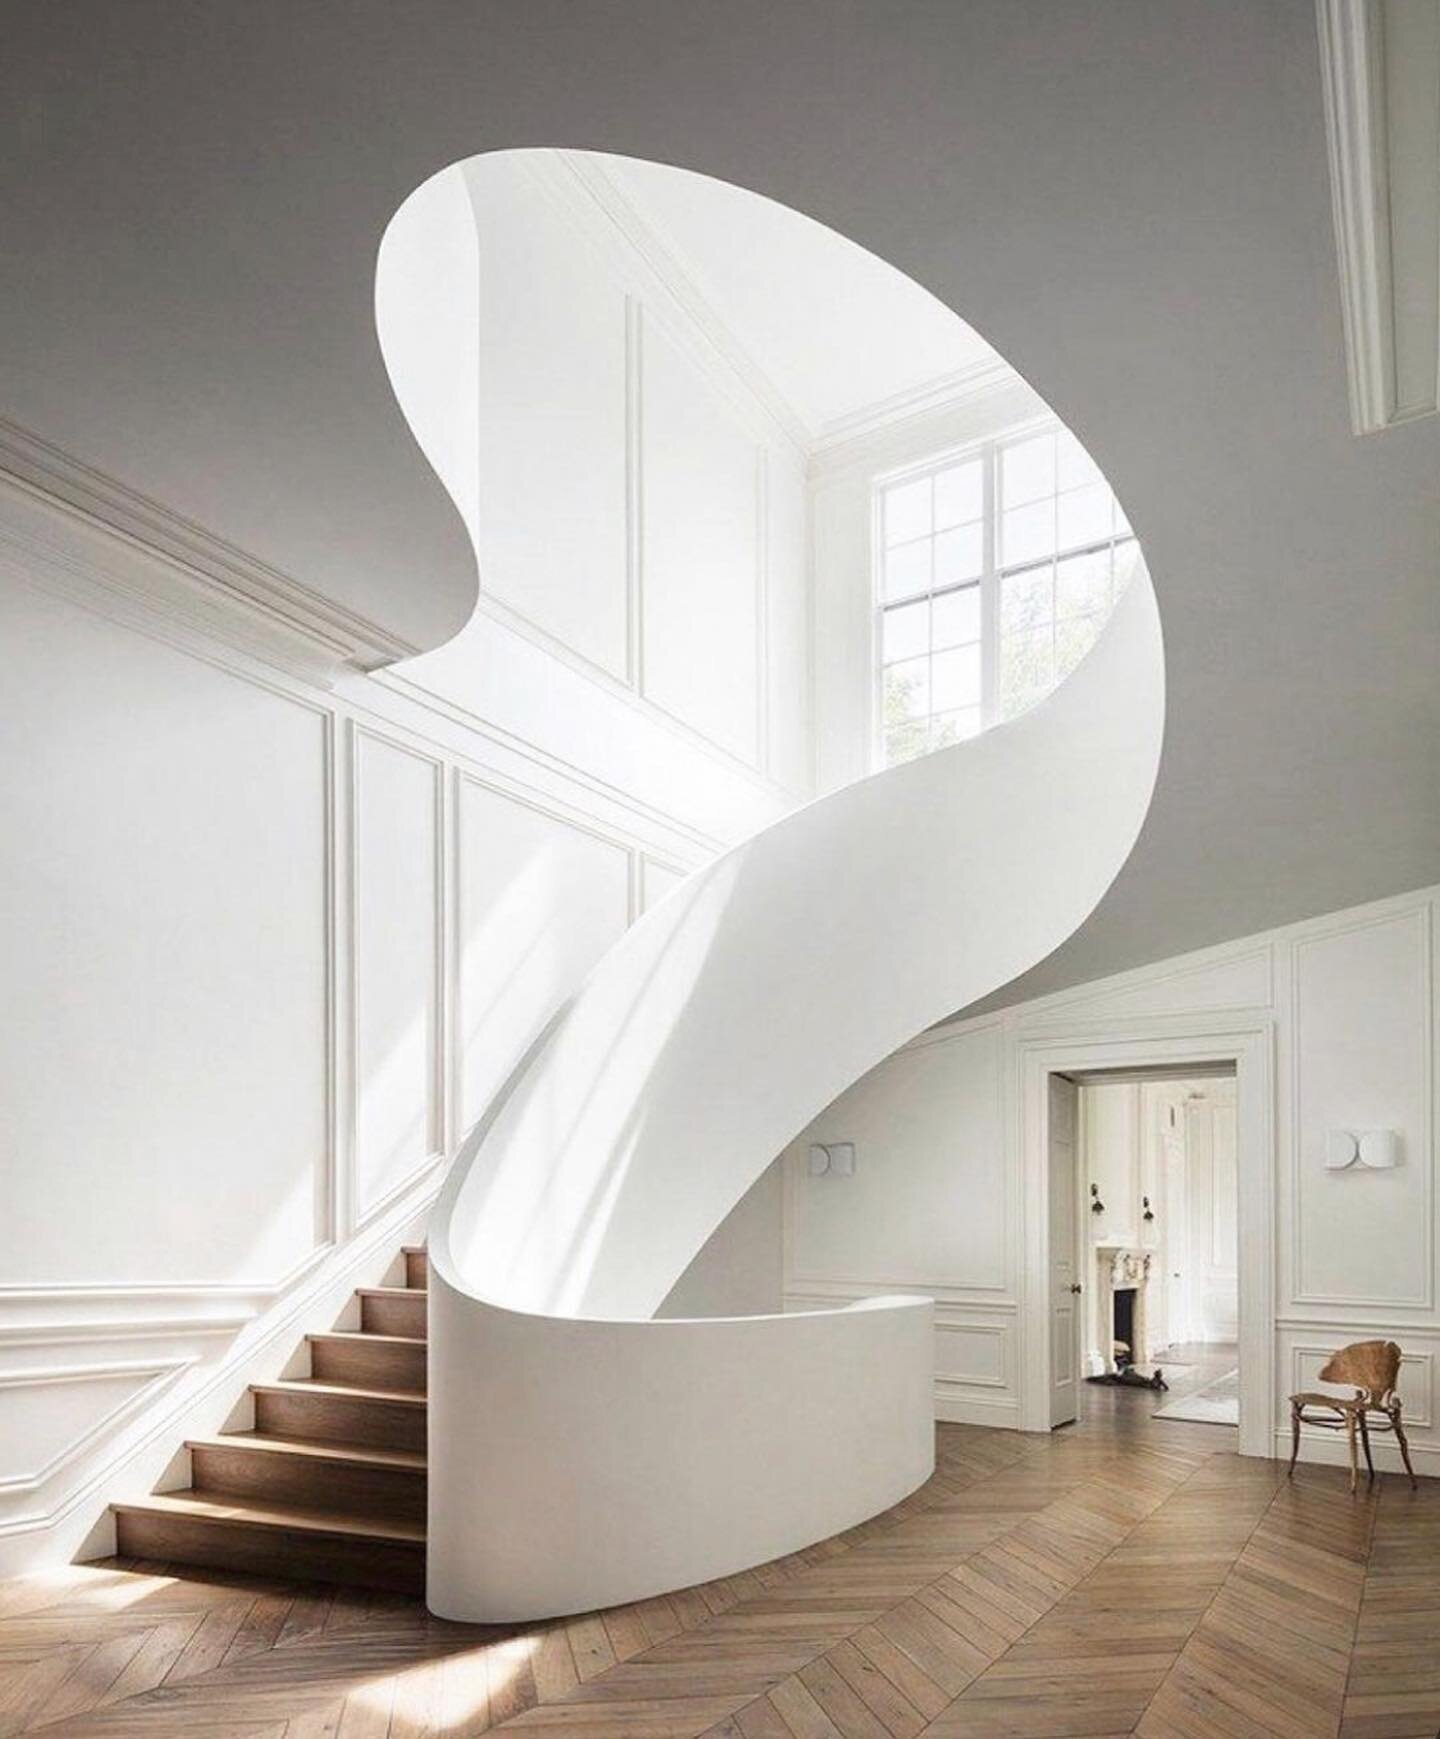 This is my idea of a stairway to heaven! #obsessed with staircases that are the architectural focal-point &amp; a stand alone masterpiece ❤️ 📷@stevenharrisarchitects